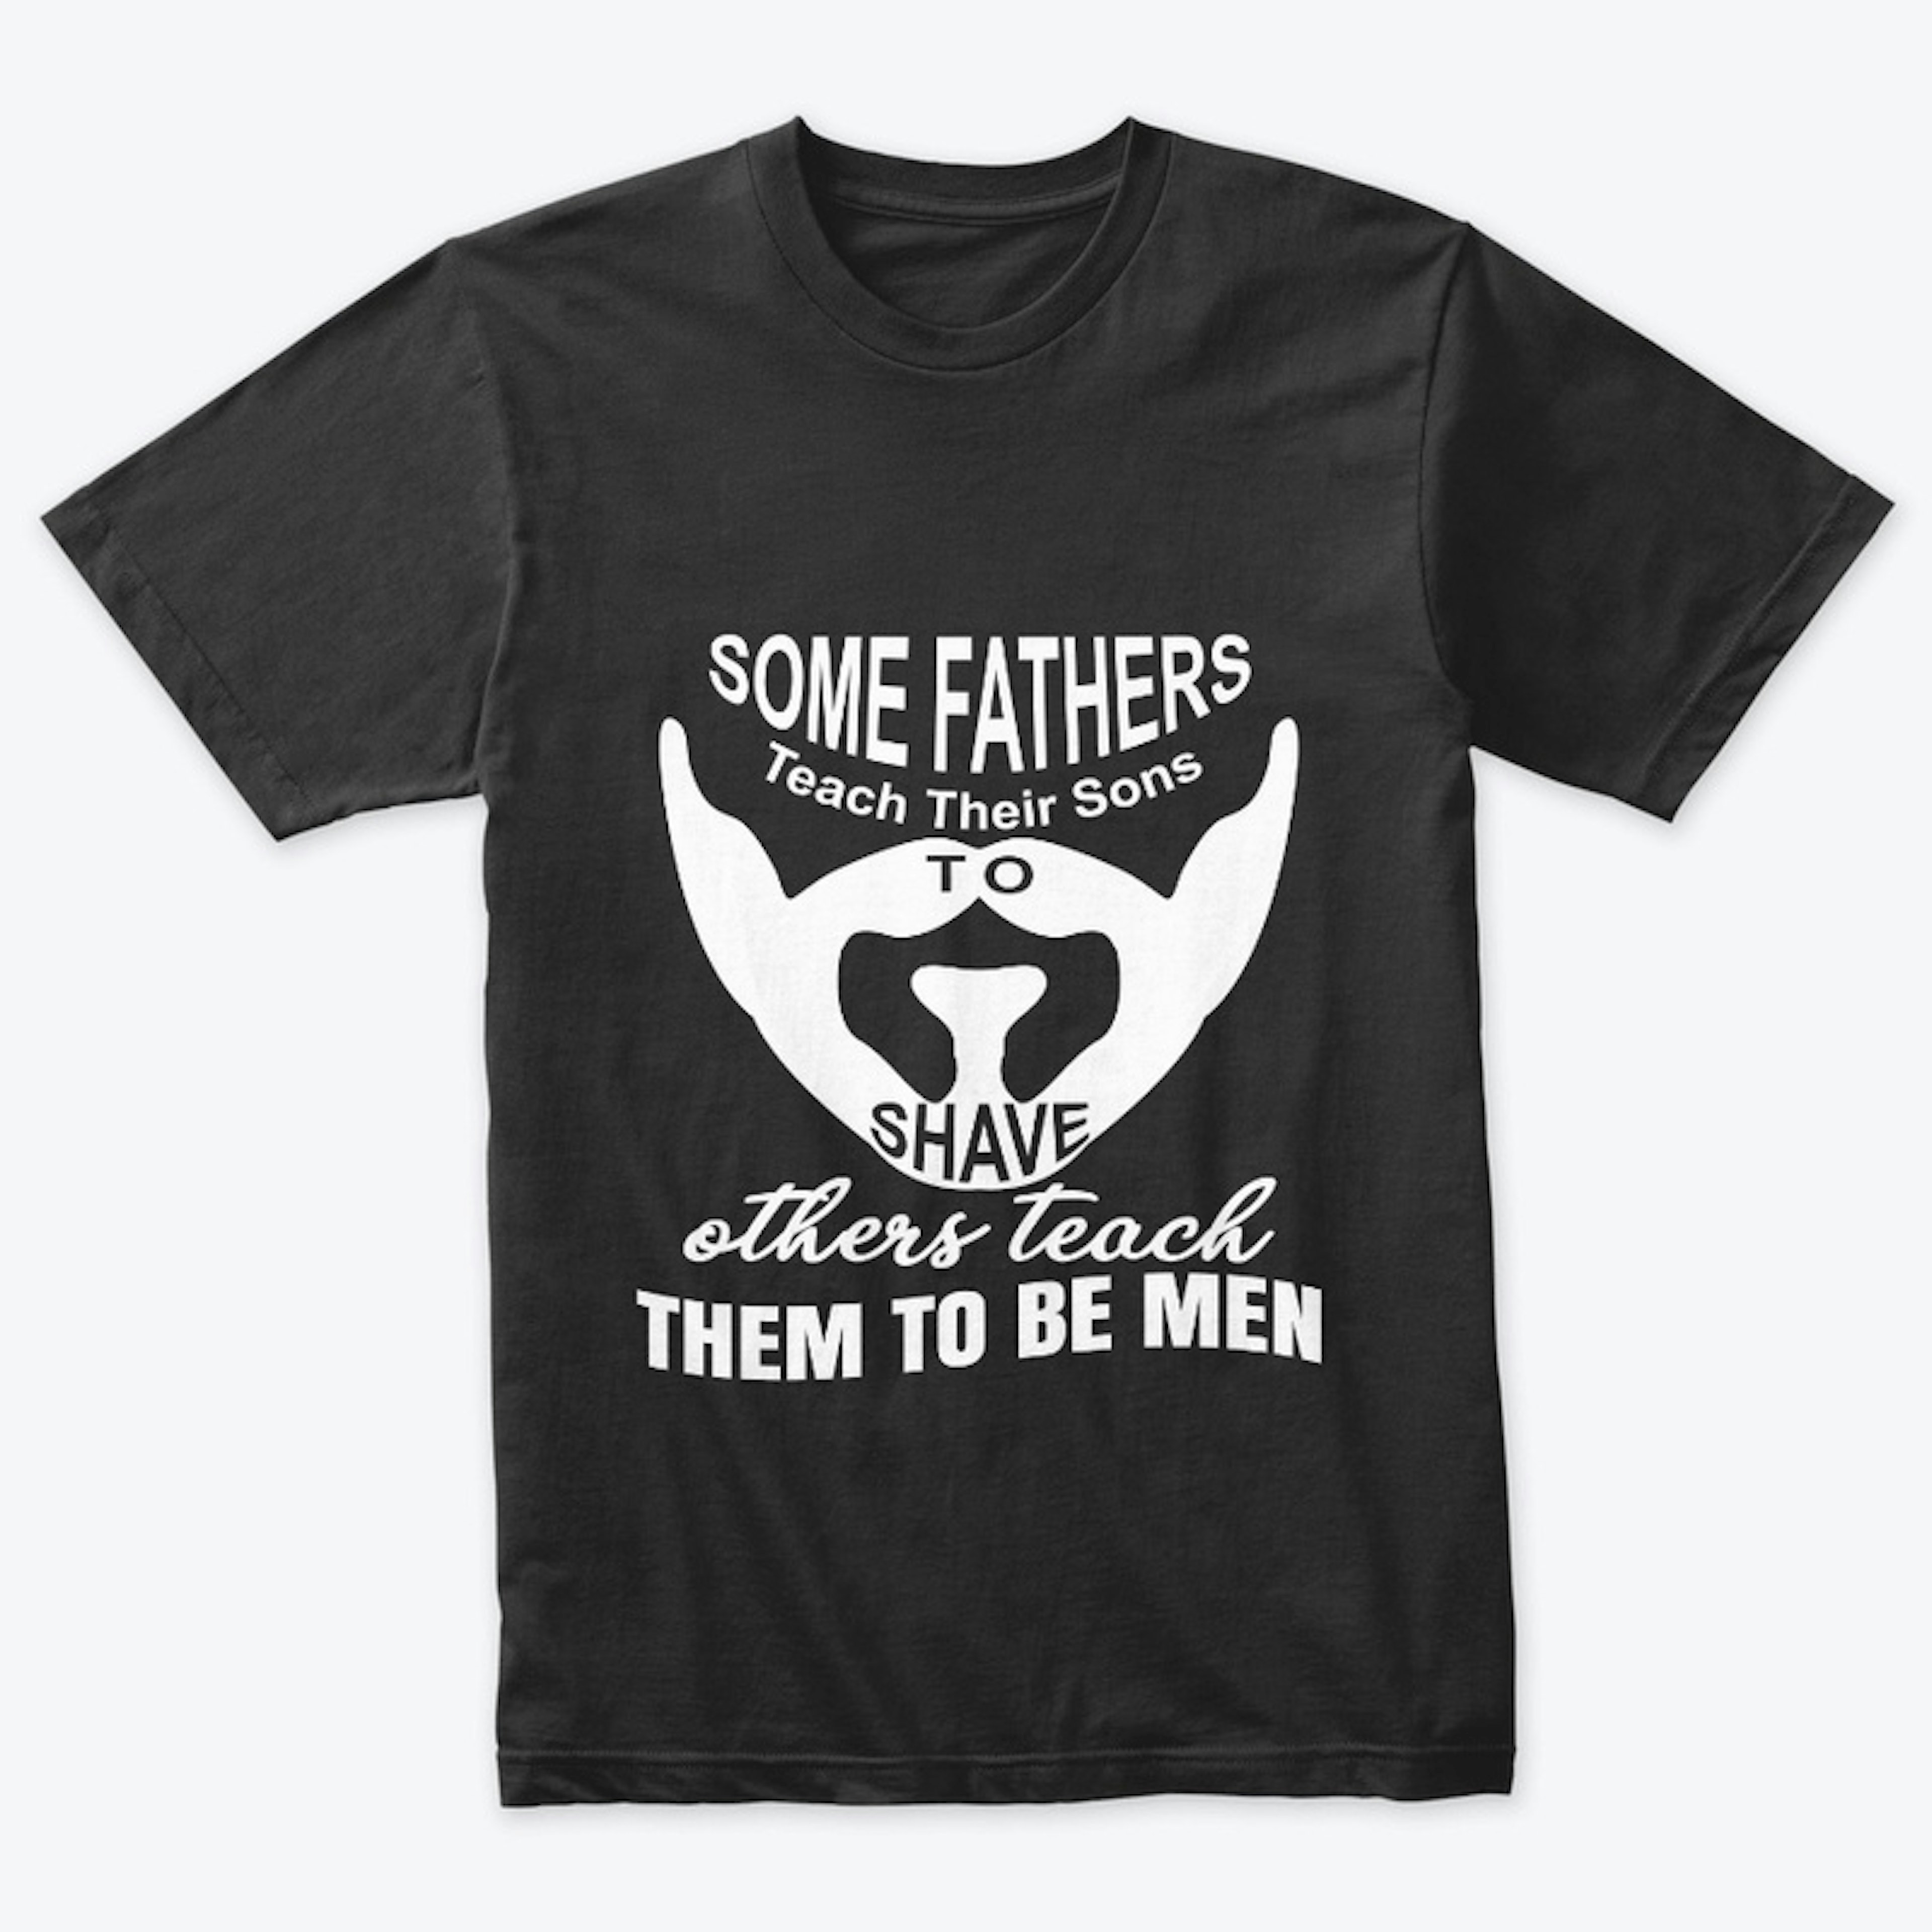 Fathers teach sons to be man.